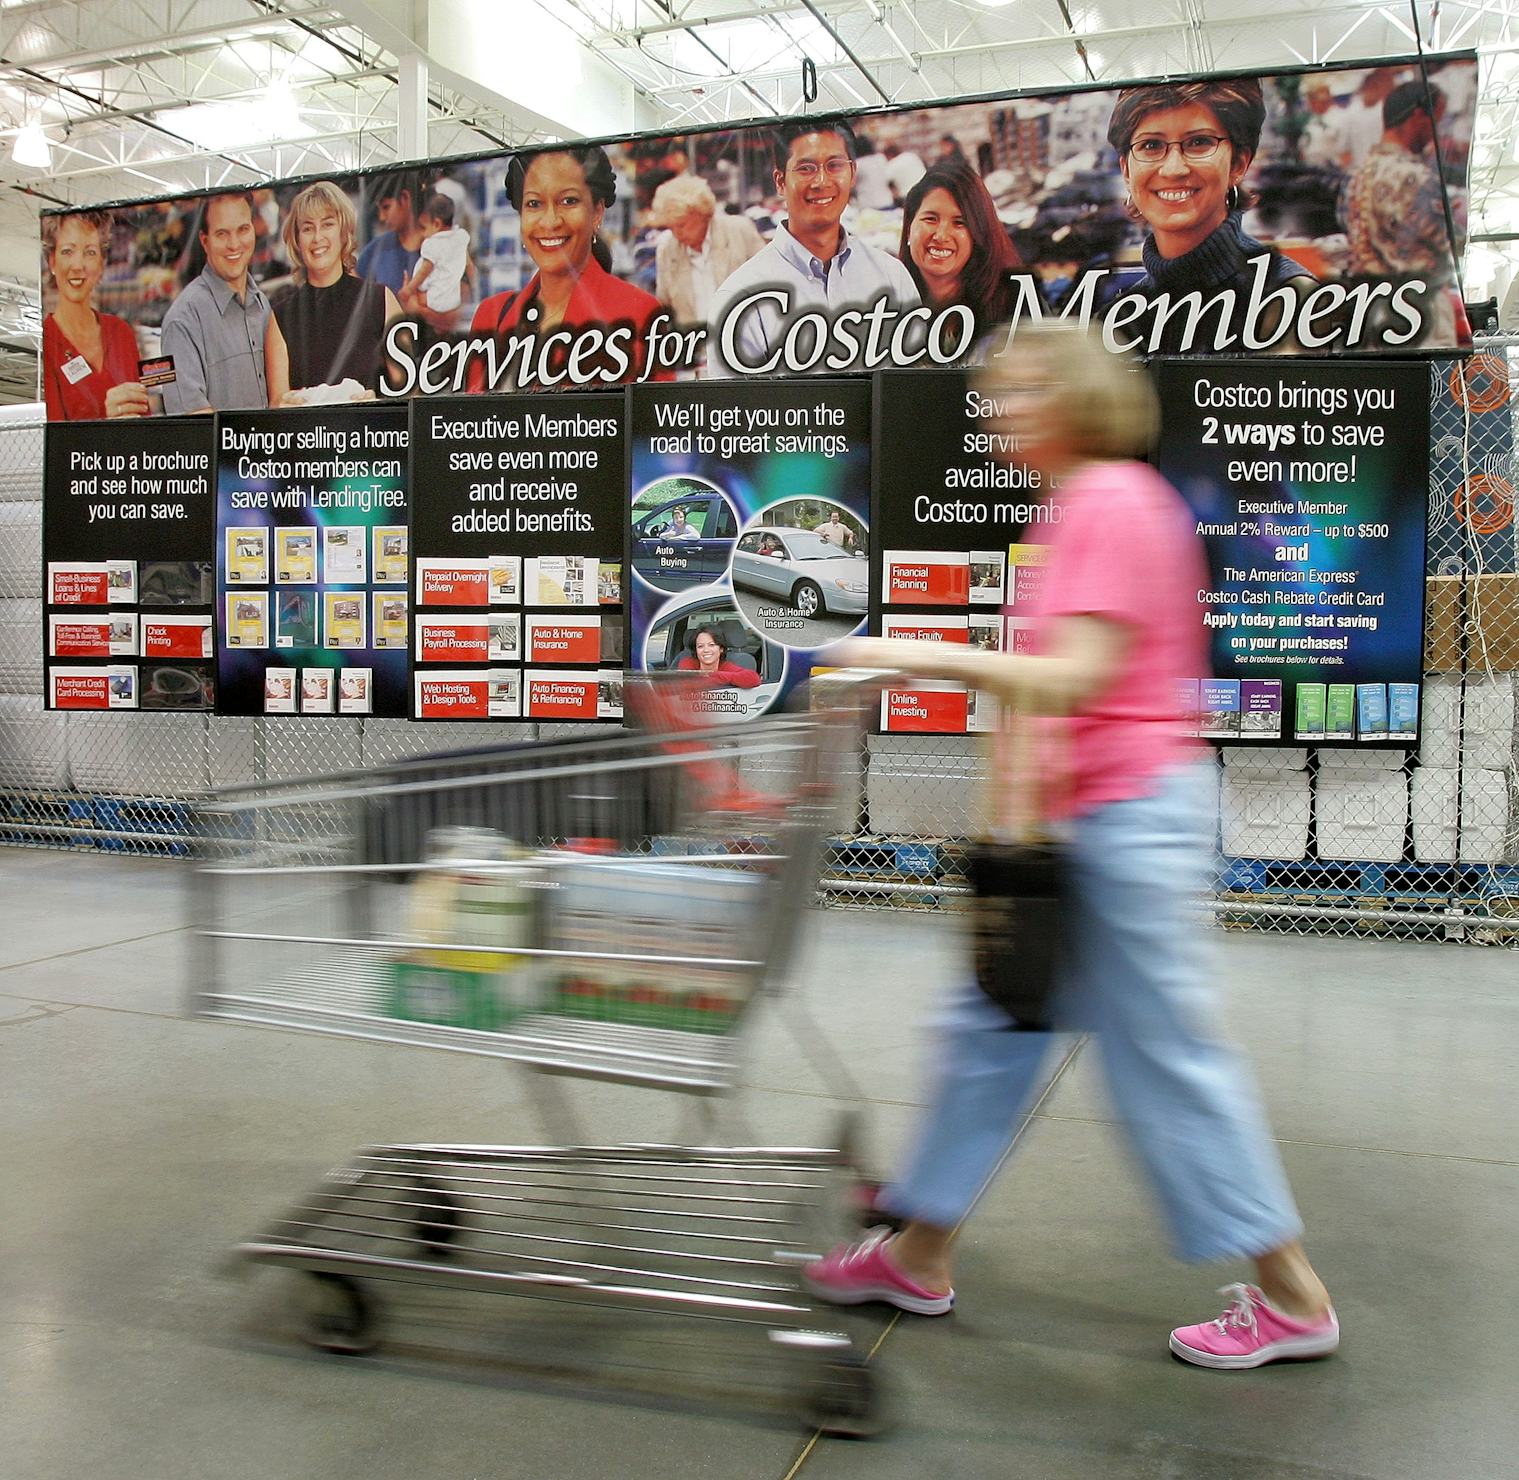 Groupon's Costco Membership Deal For 60 Is A Huge Money Saver